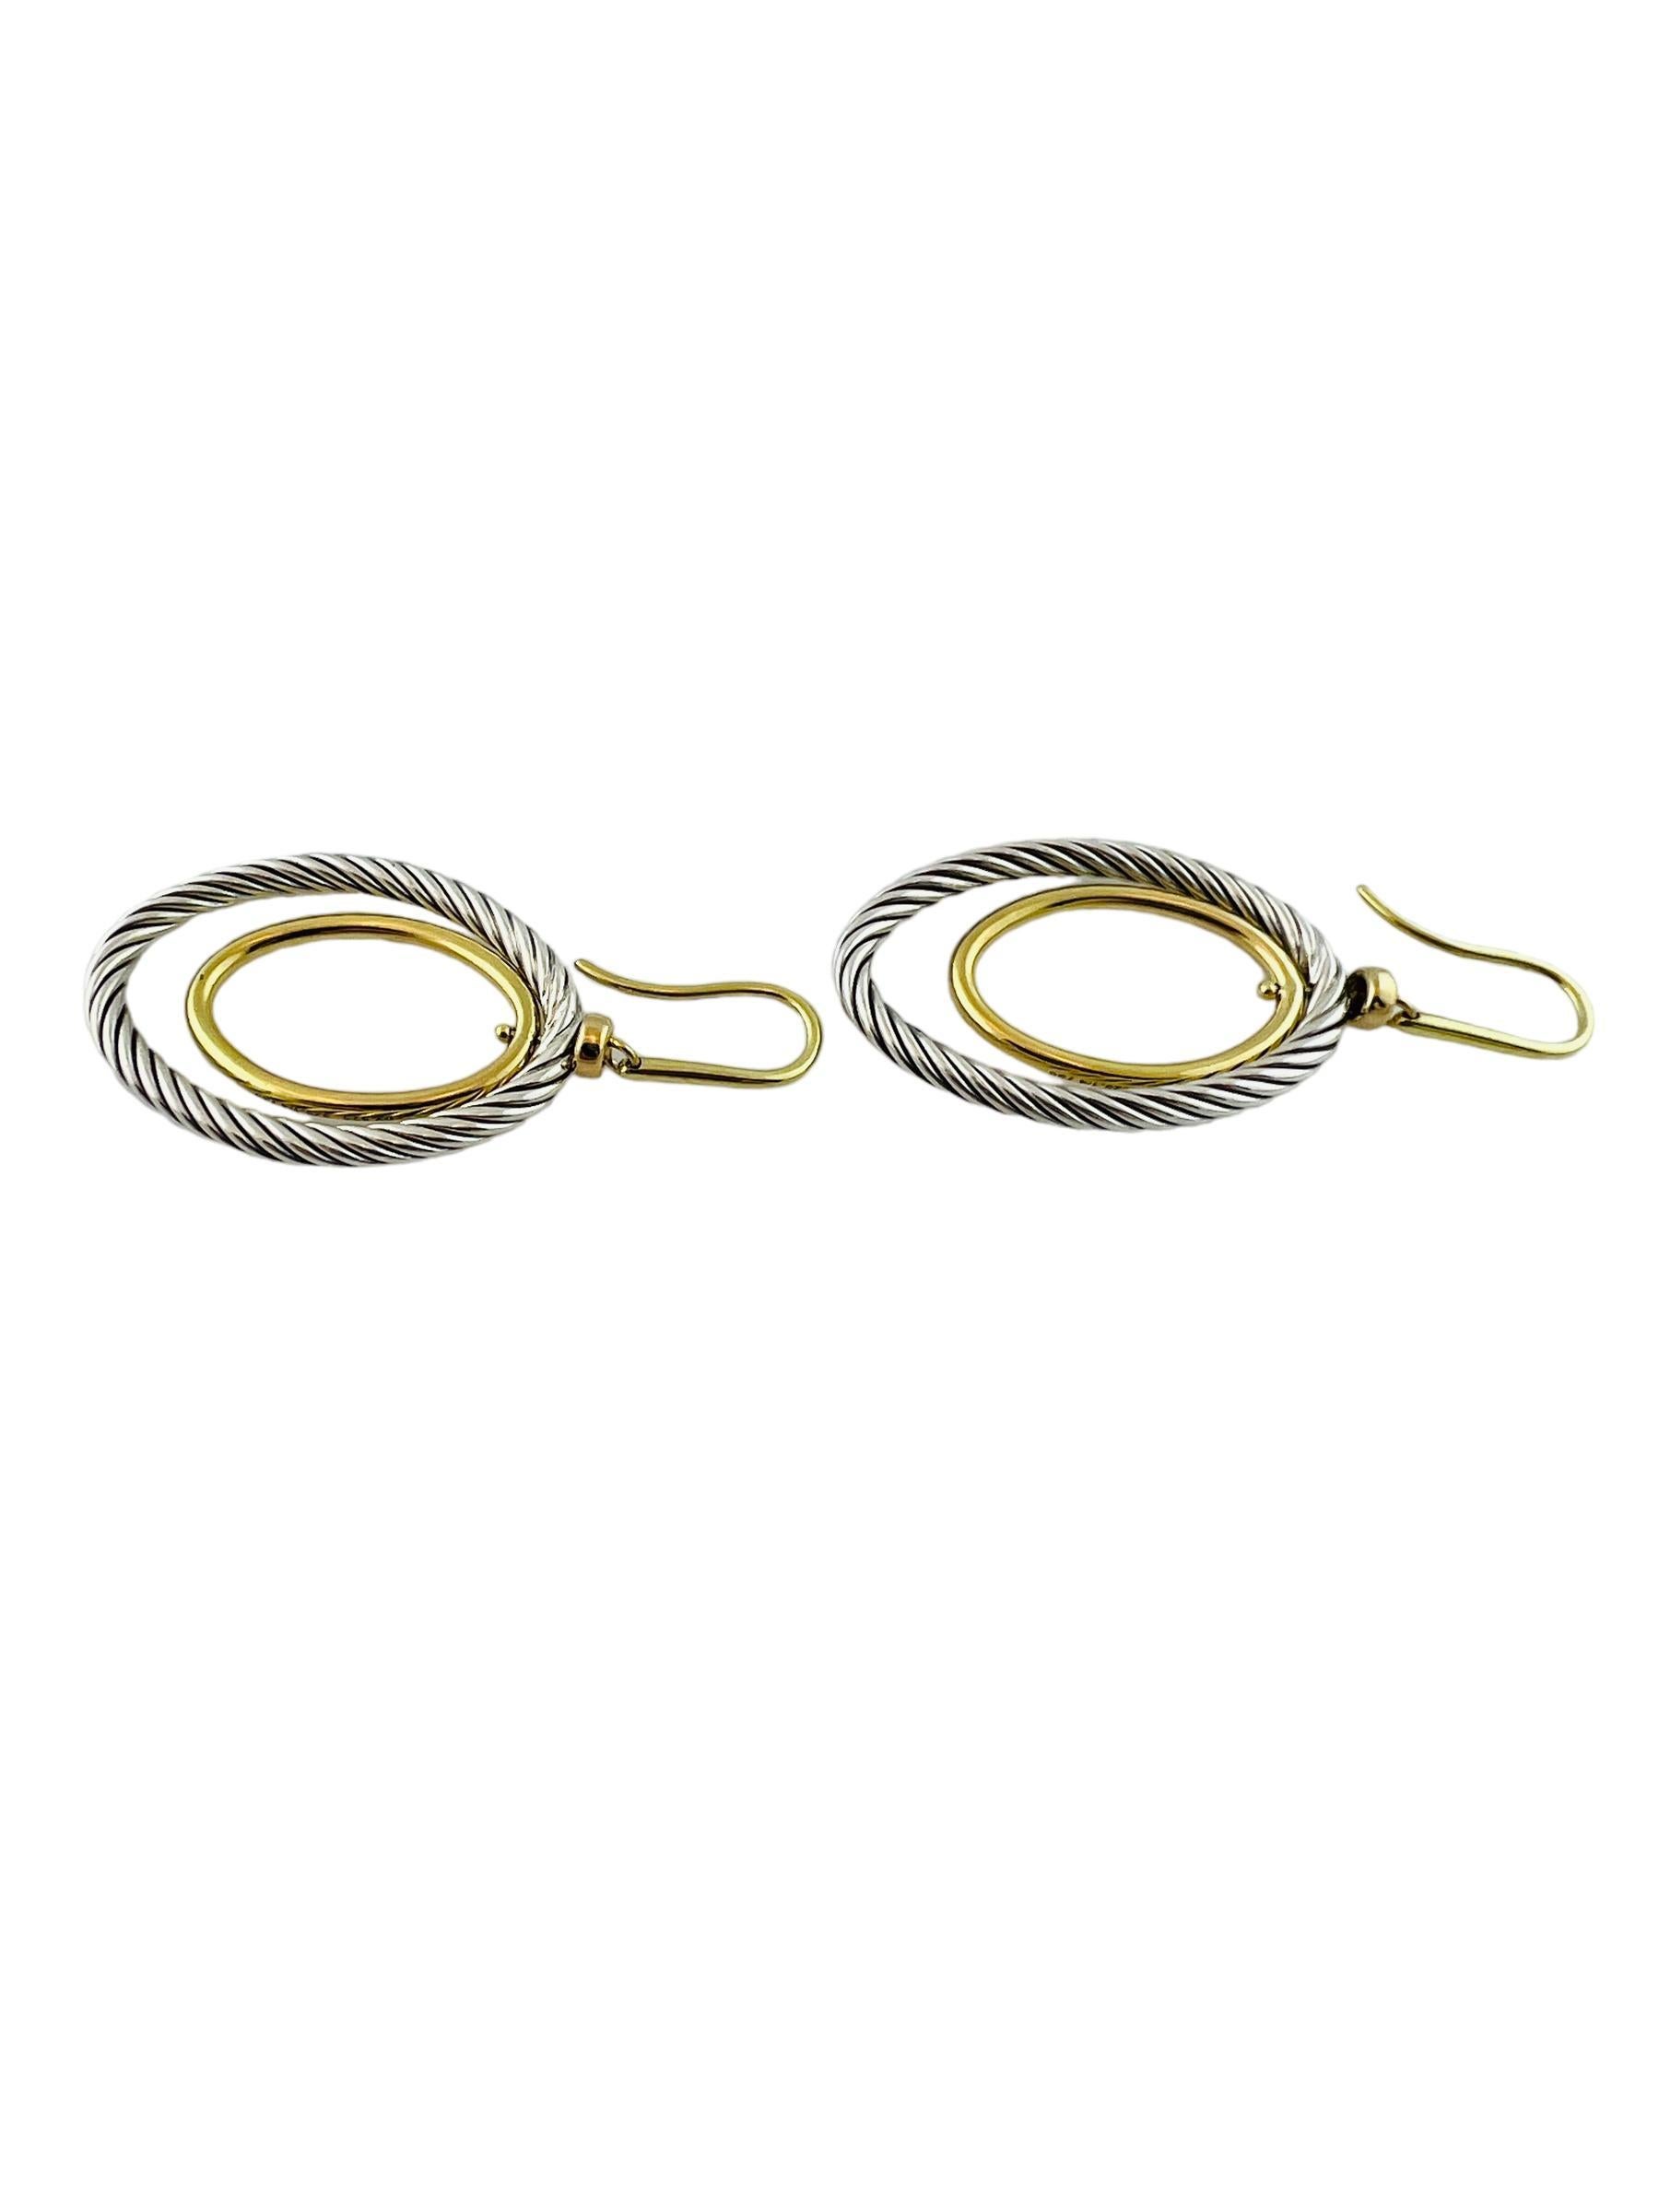 David Yurman Sterling Silver 18K Gold Plated Double Oval Dangle Earrings with Pouch

These earrings feature one 18K gold plated oval hoop inside a sterling cable hoop.

Earrings are approx. 1 1/4